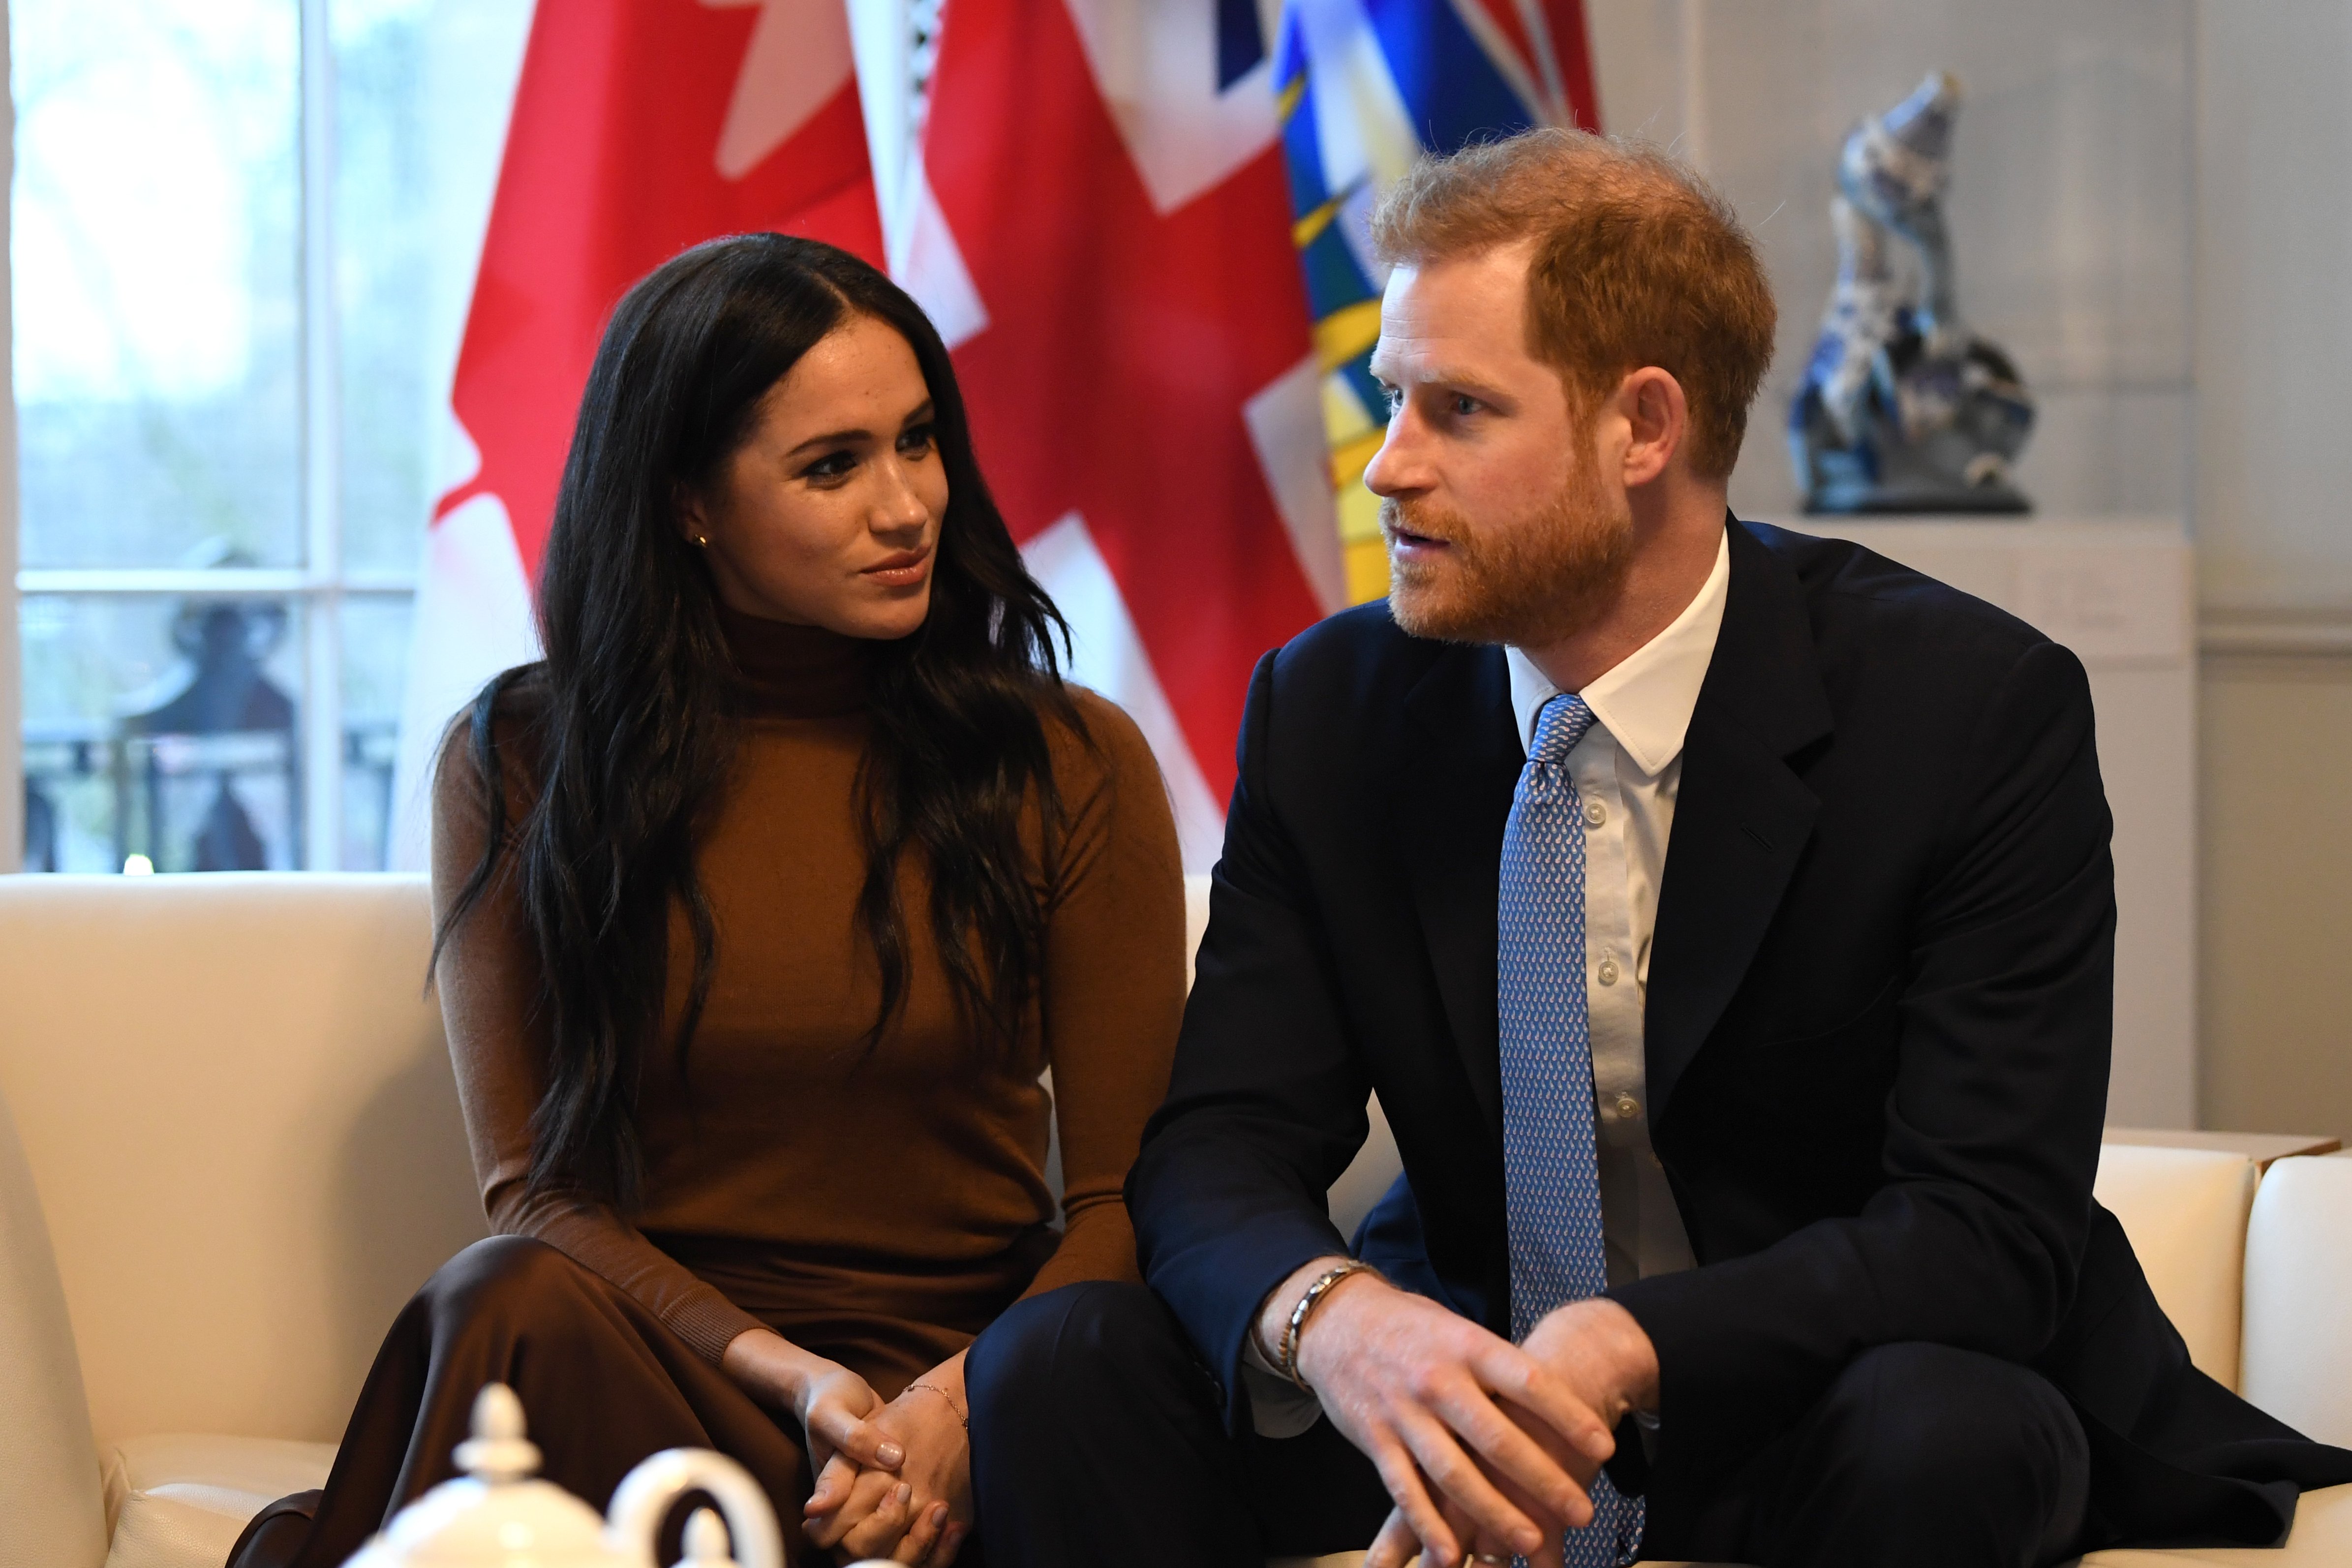 Prince Harry and Meghan during their visit to Canada House on January 7, 2020, in London, England. | Photo: Getty Images.